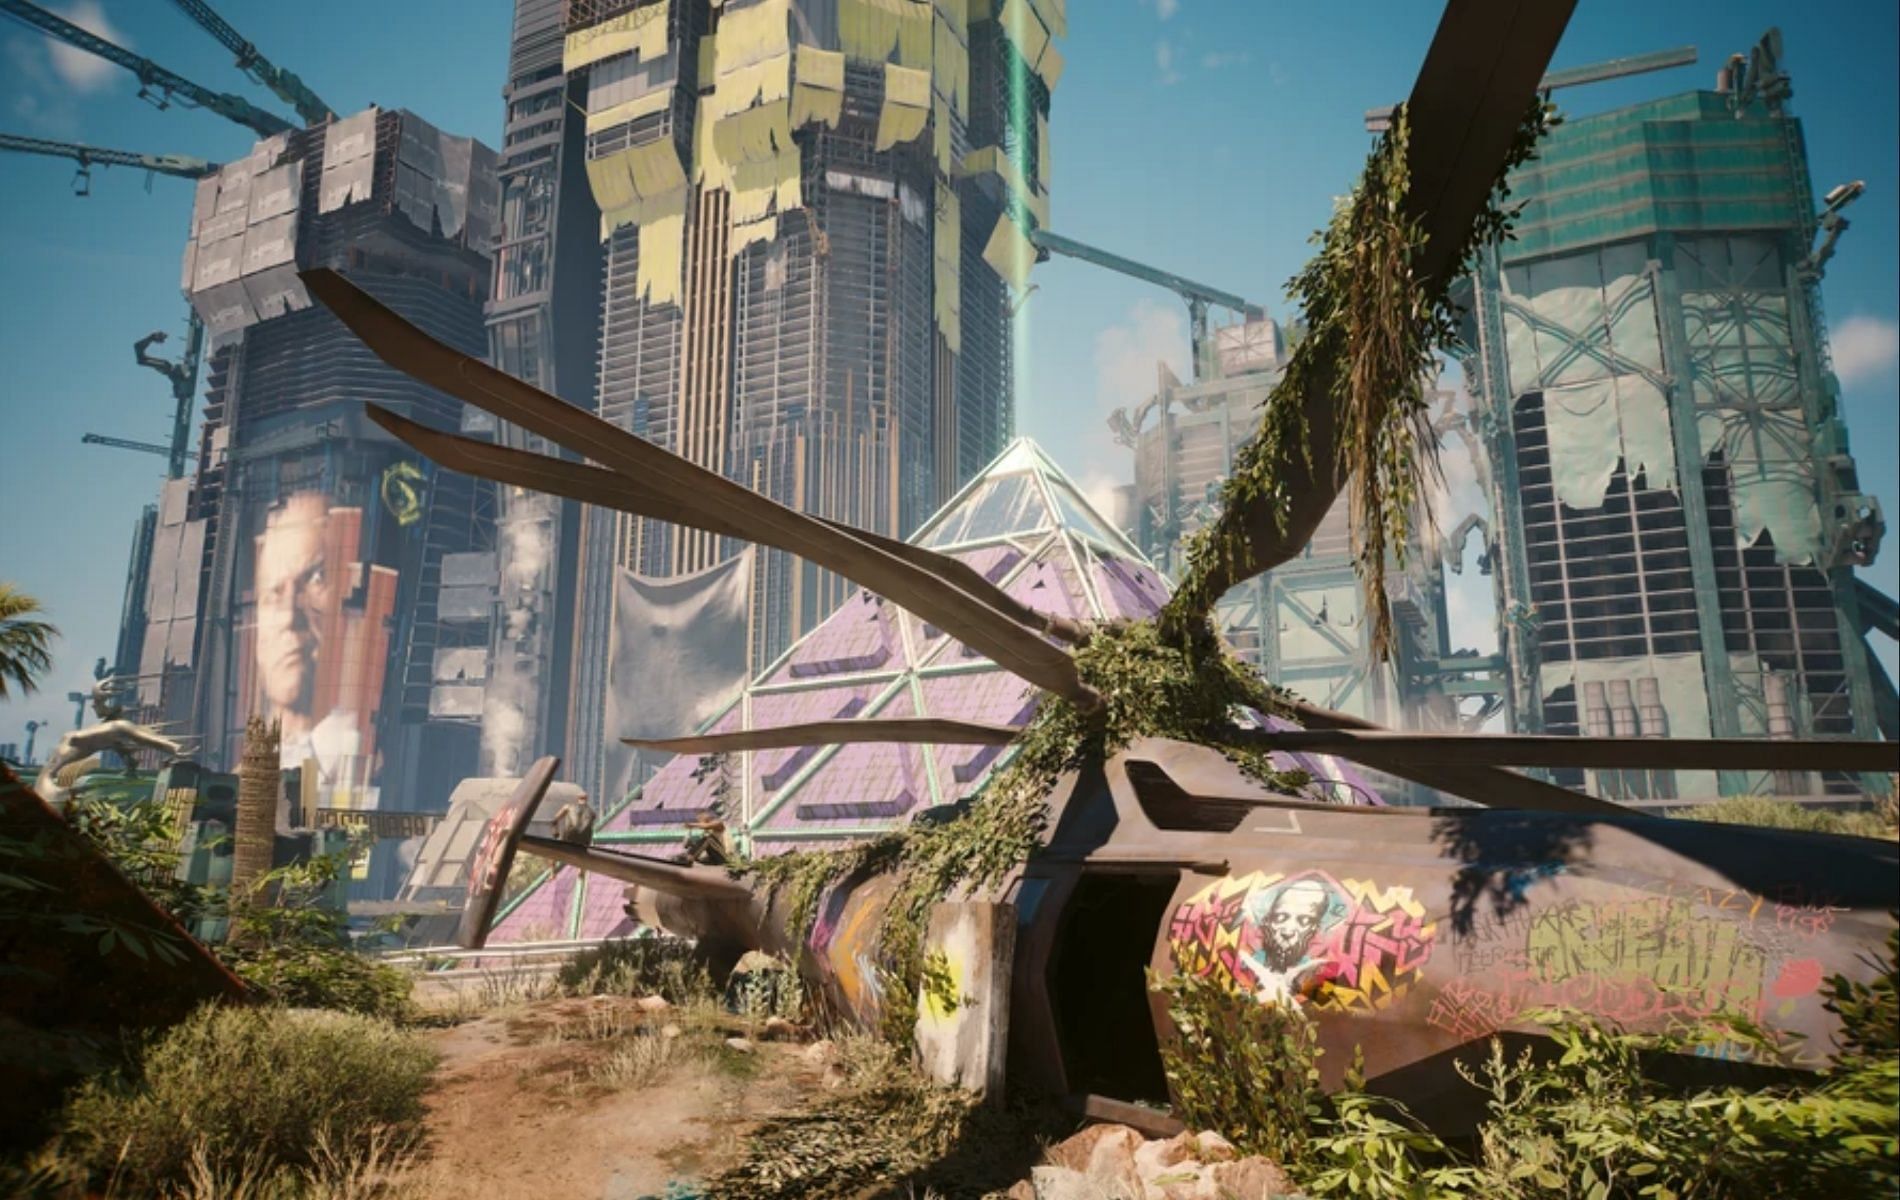 Search for the destroyed chopper with vegetation growing on it. (Image via CDPR)